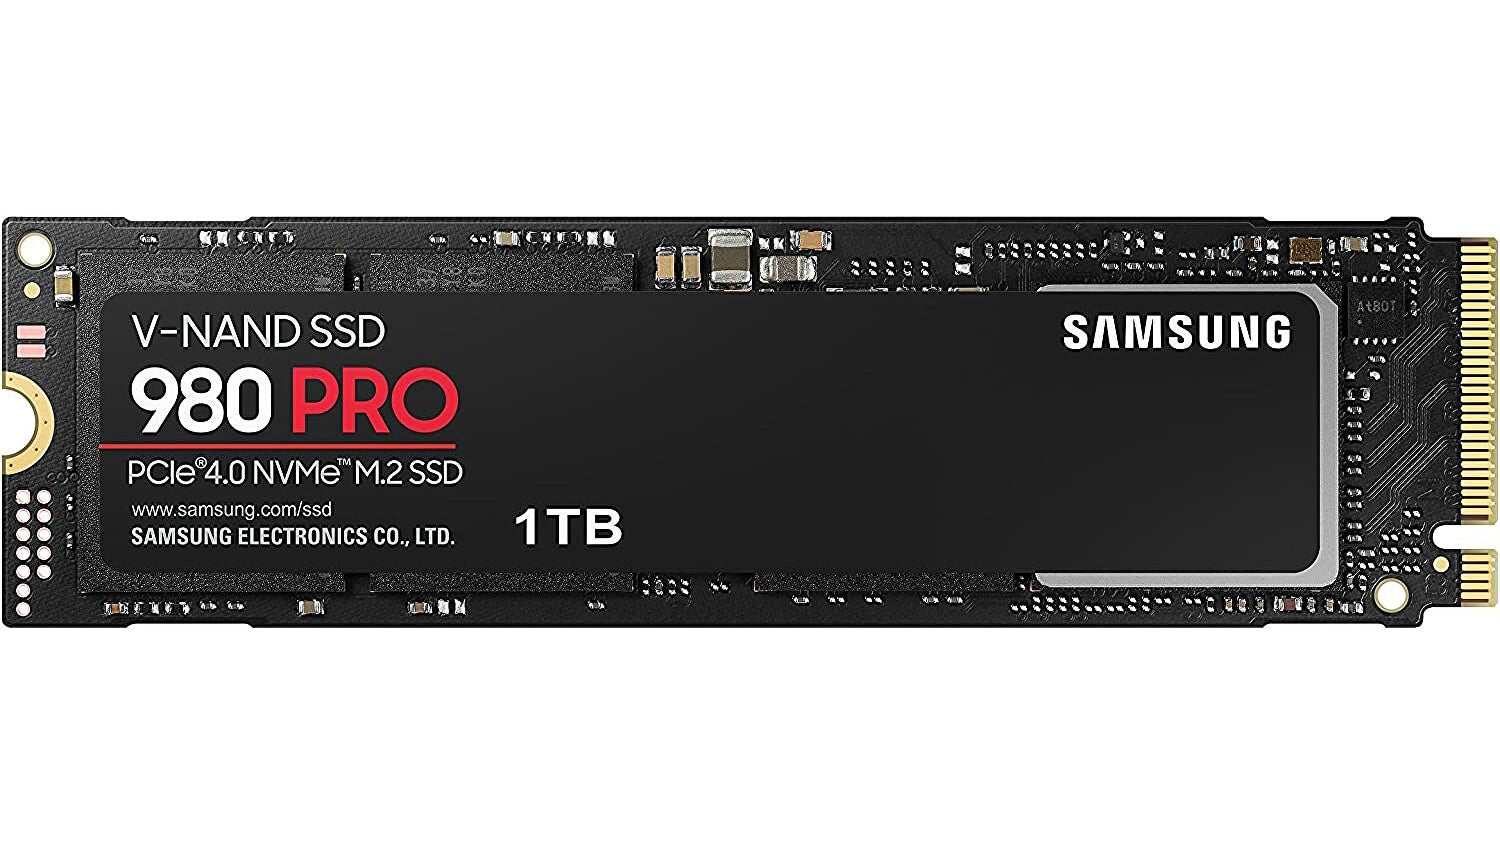 samsung 980 pro nvme pcie 4.0 ssd, shown in a 1tb capacity.